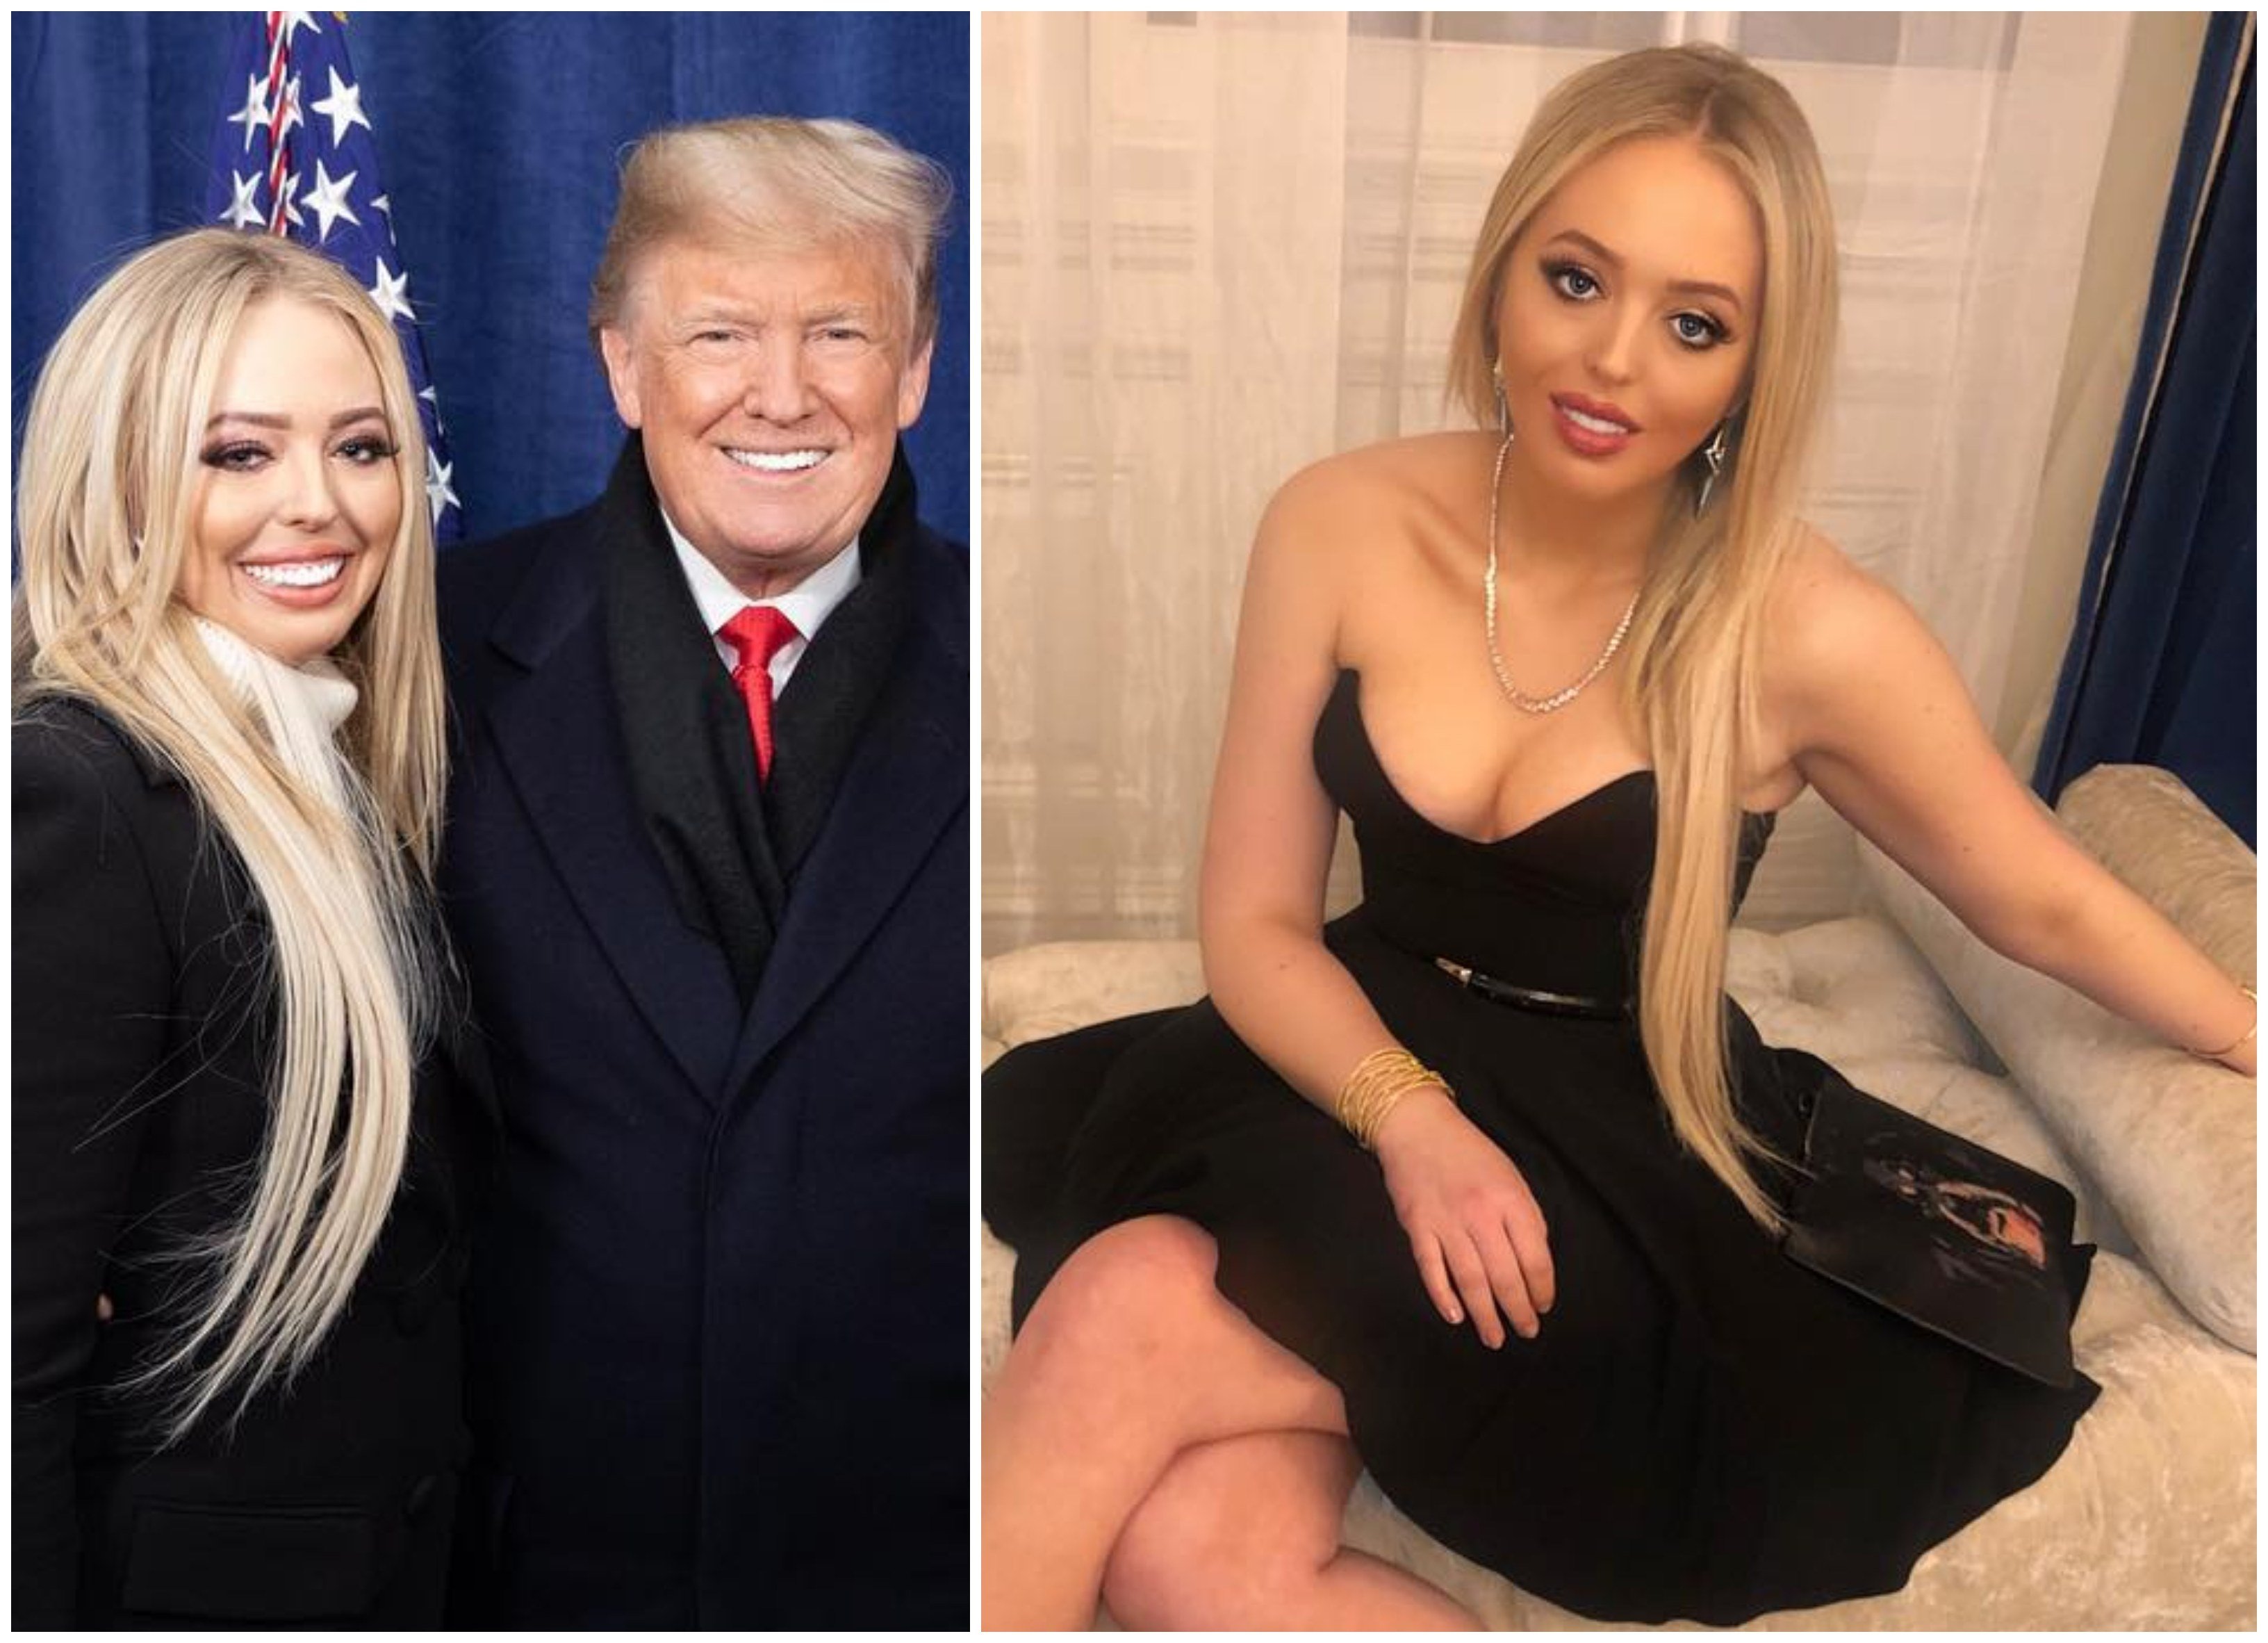 Tiffany Trump is Donald Trump’s daughter with Marla Maples ... and she’s about to get married. Photos: @tiffanytrump/Instagram